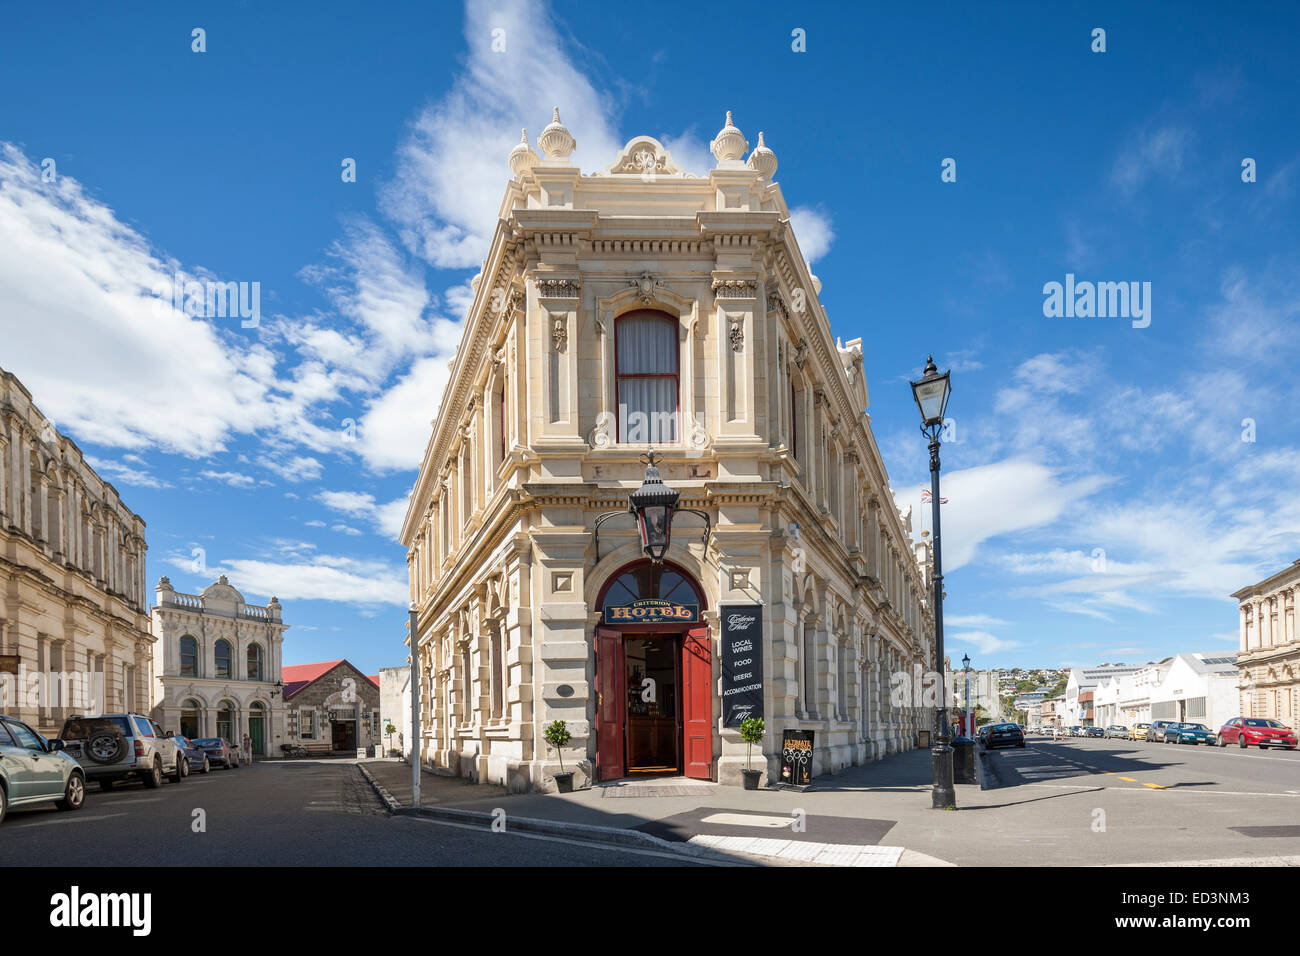 New Zealand Oamaru. The Criterion Hotel and other old Victorian style buildings in the Historic Harbour Harbor district. Stock Photo